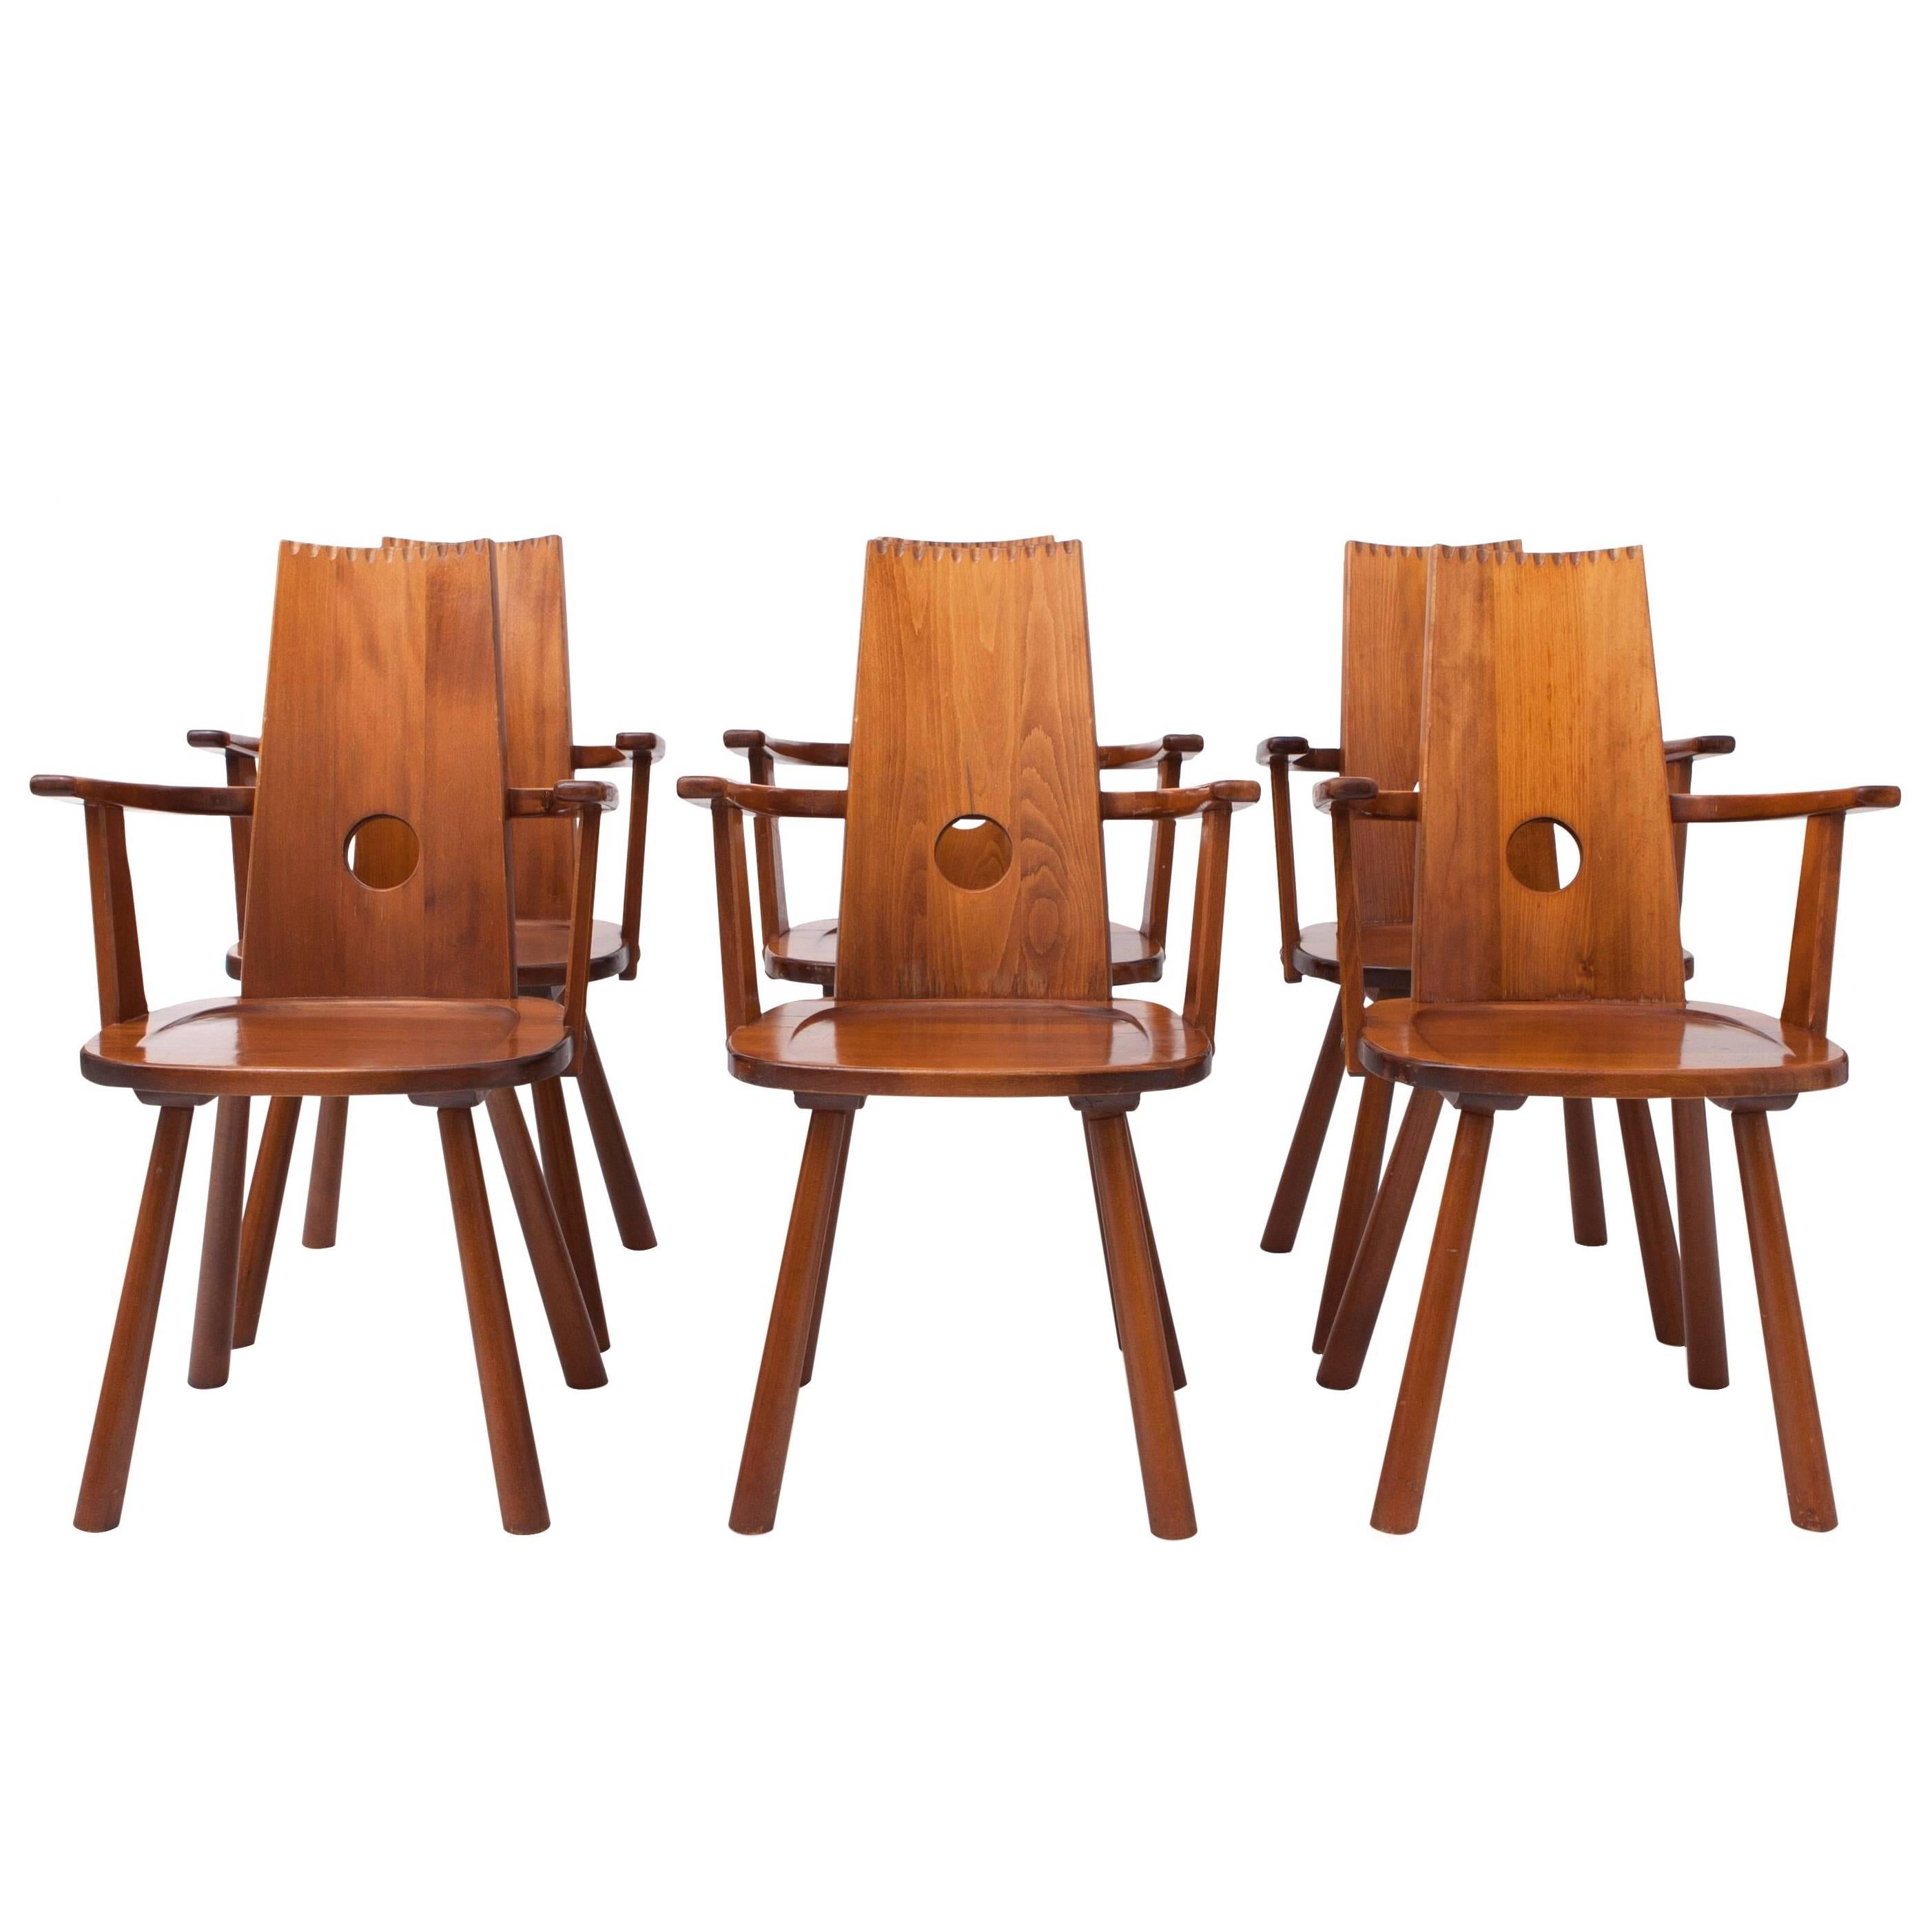 French Mid-Century Modern Dining Chairs, set of six